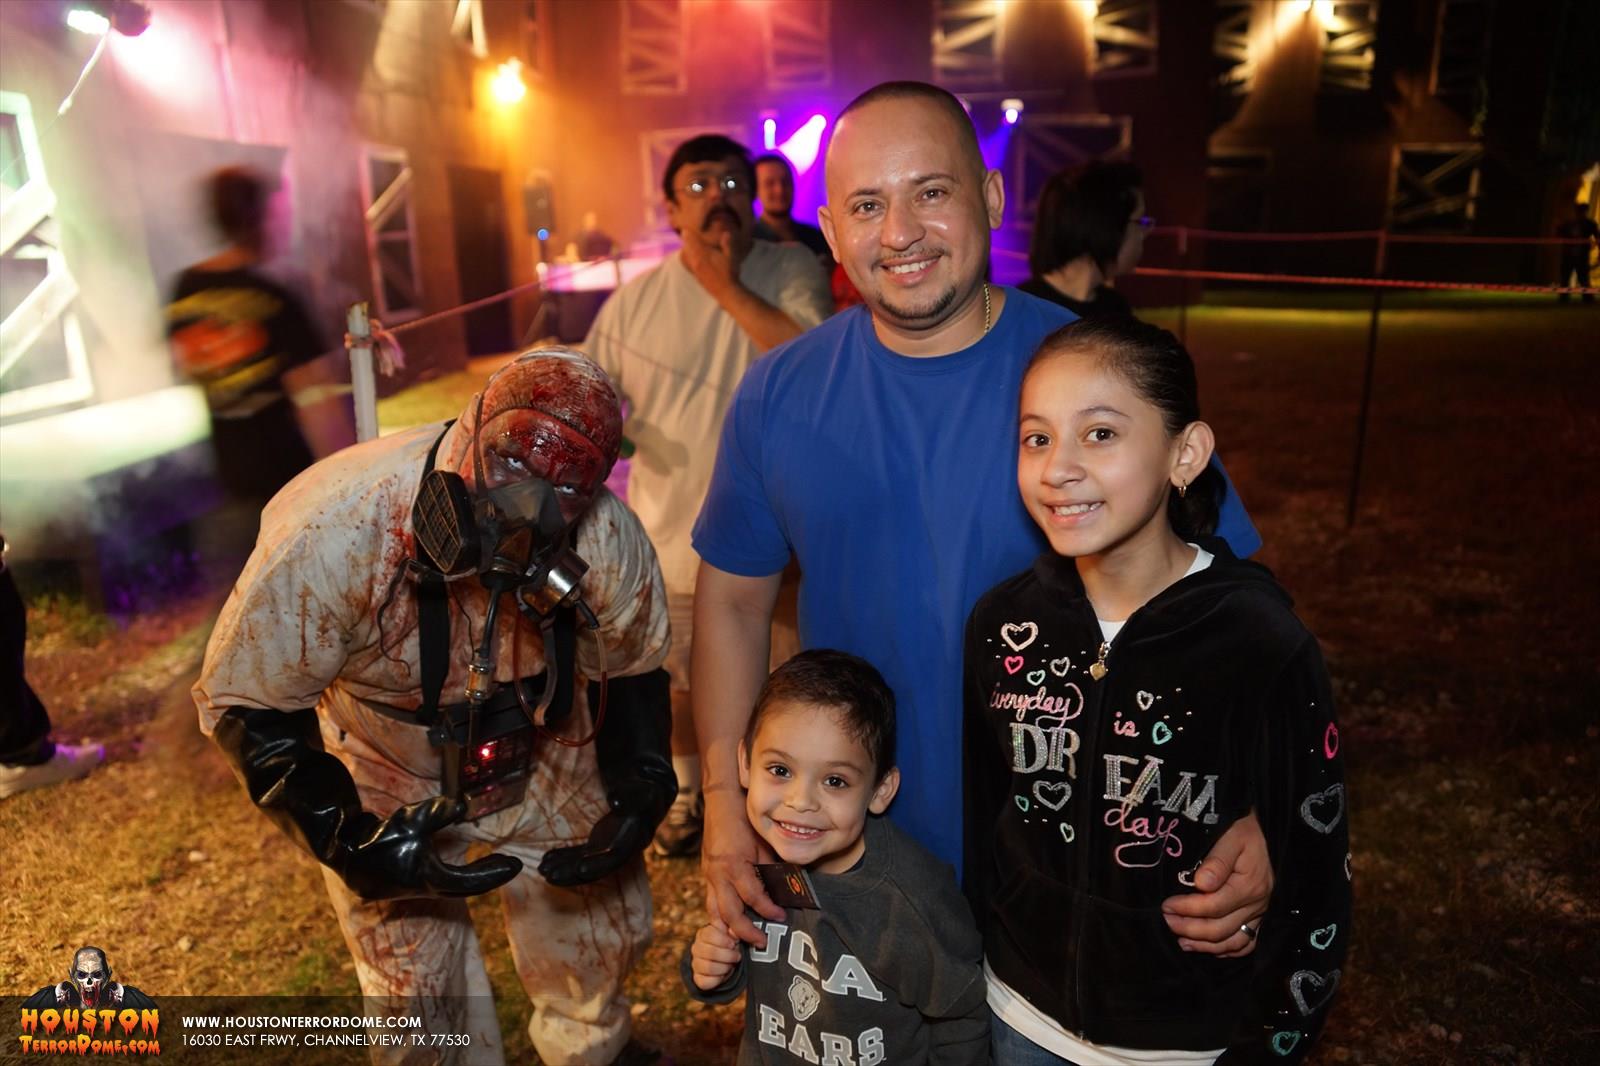 Young kid stays close to dad while waiting in line at the Haunted house